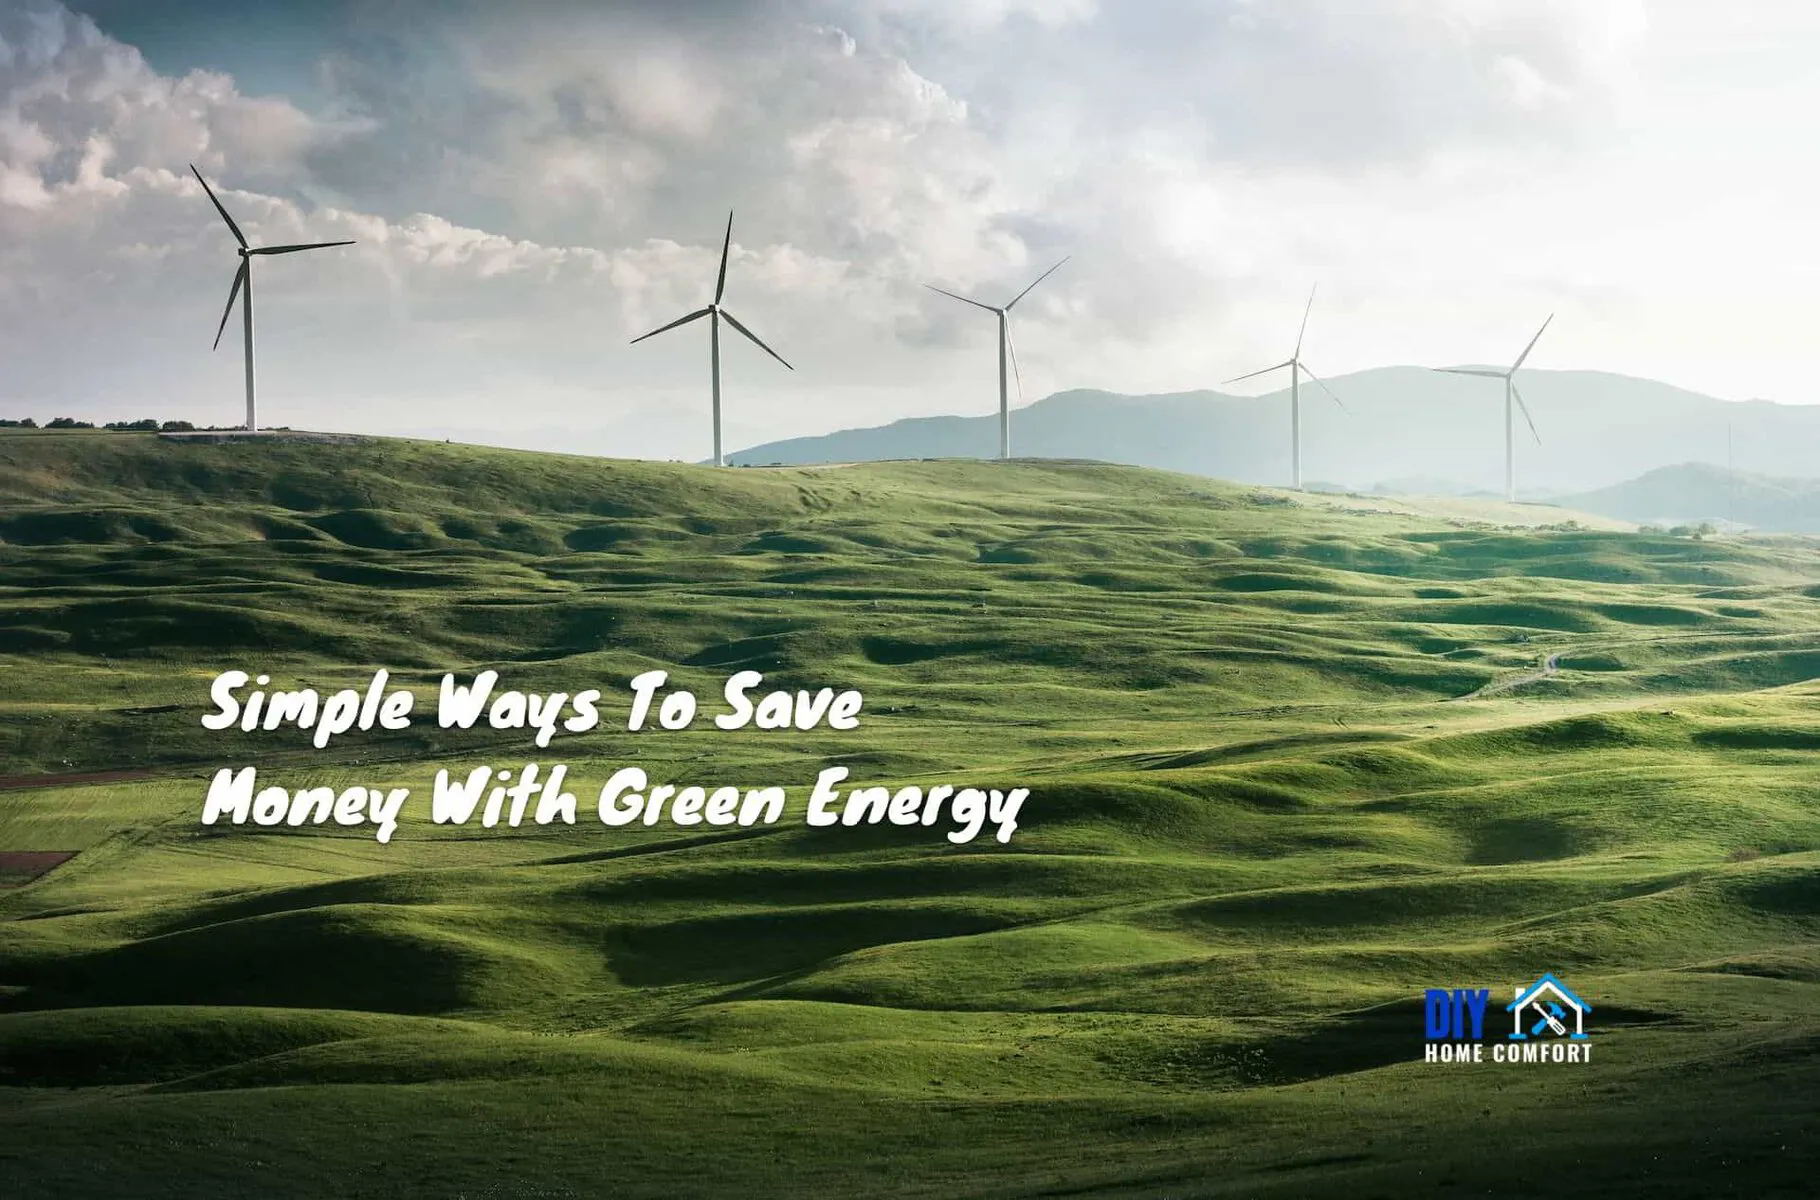 Simple Ways To Save Money With Green Energy | DIY Home Comfort